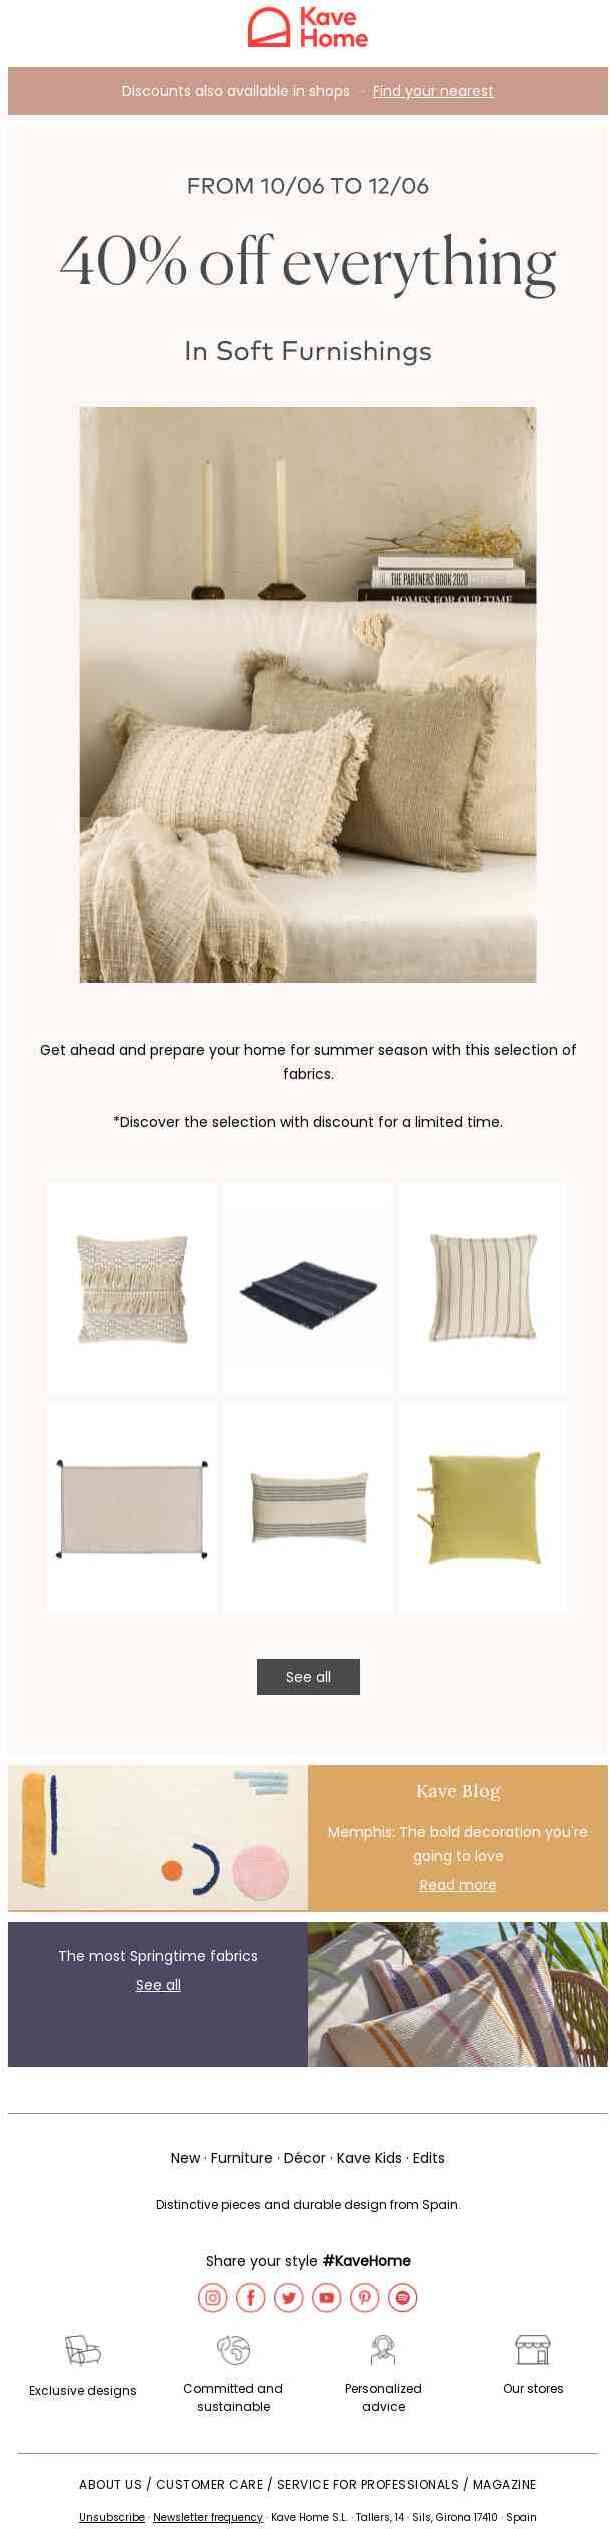 Soft furnishings at 40% off to colour your home